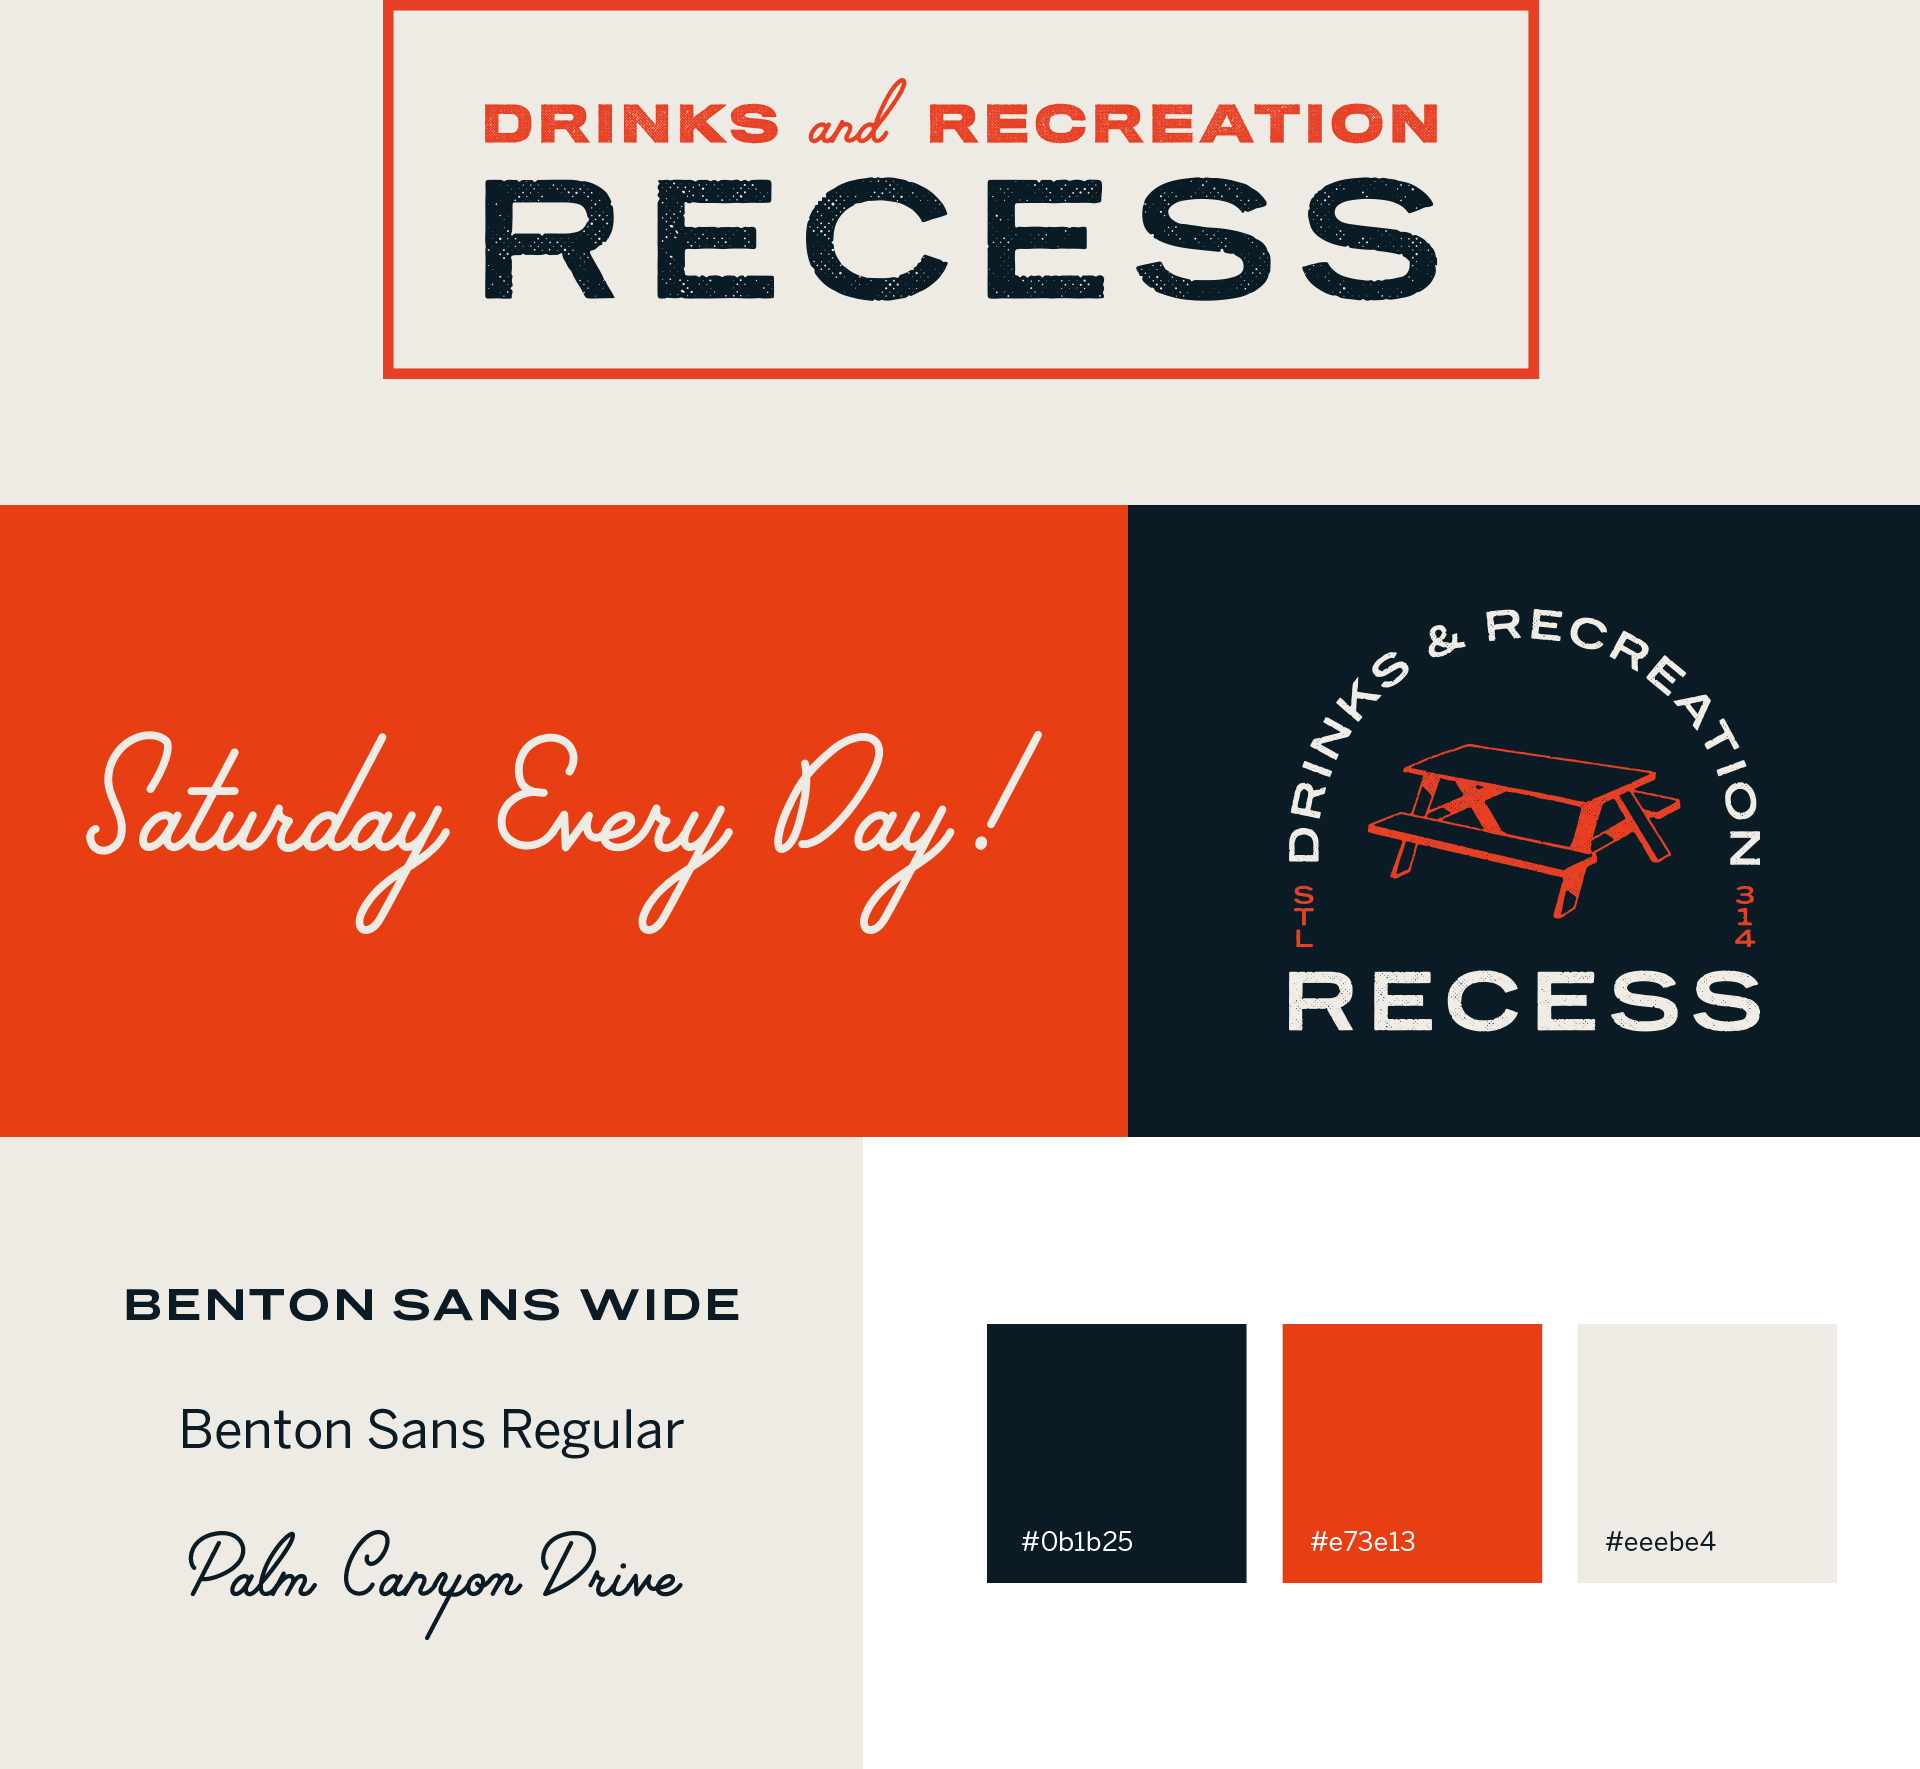 Recess brand identity with logo, brand colors, tagline and typefaces